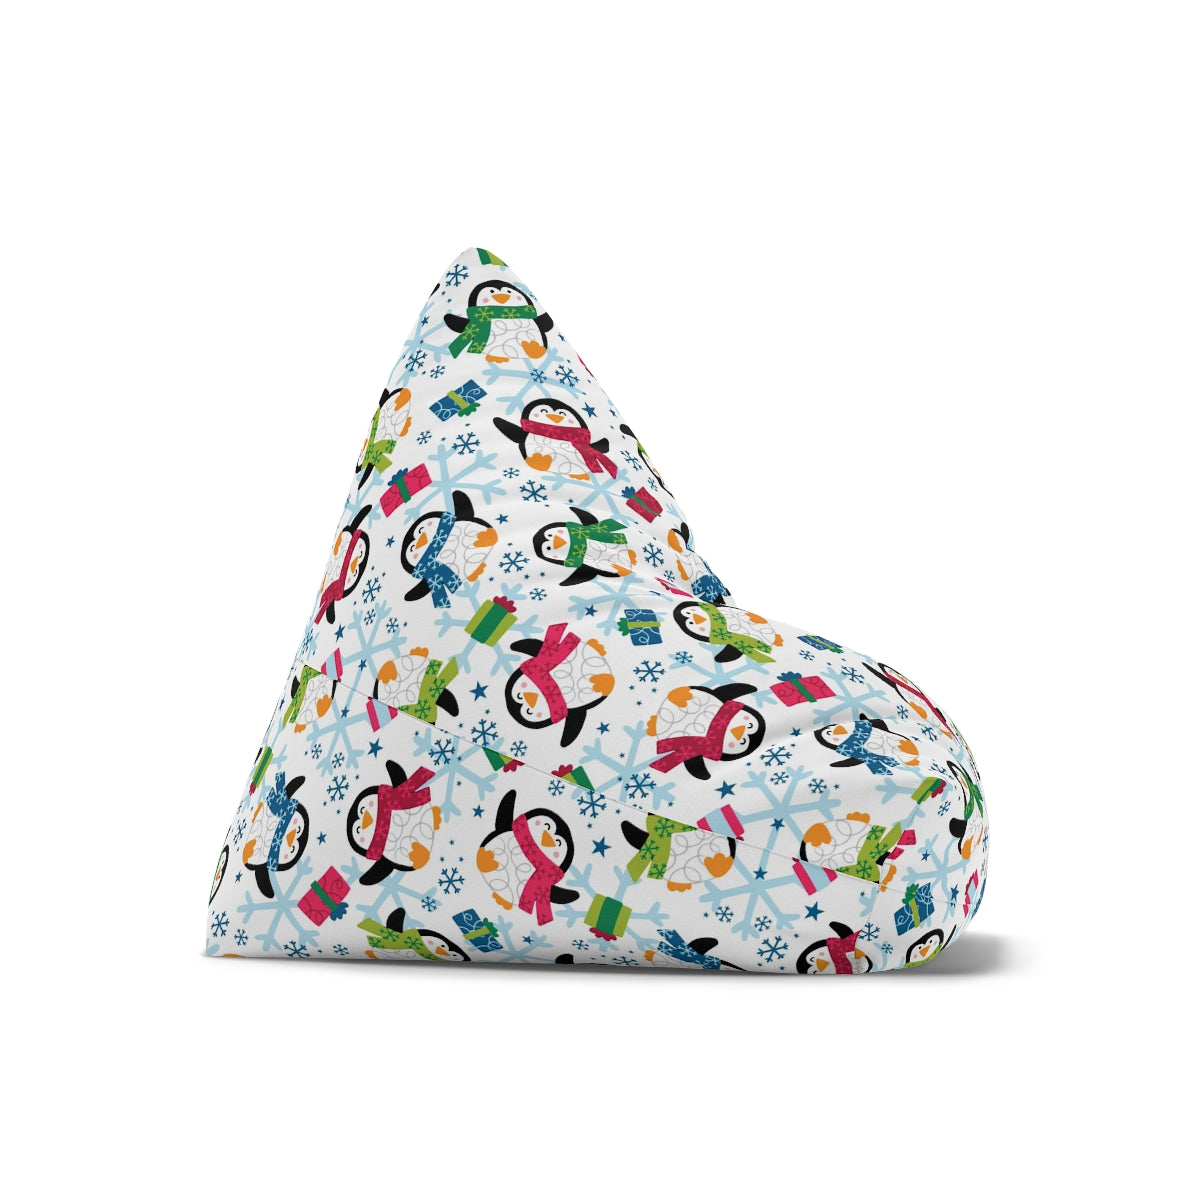 Penguins and Snowflakes Bean Bag Chair Cover